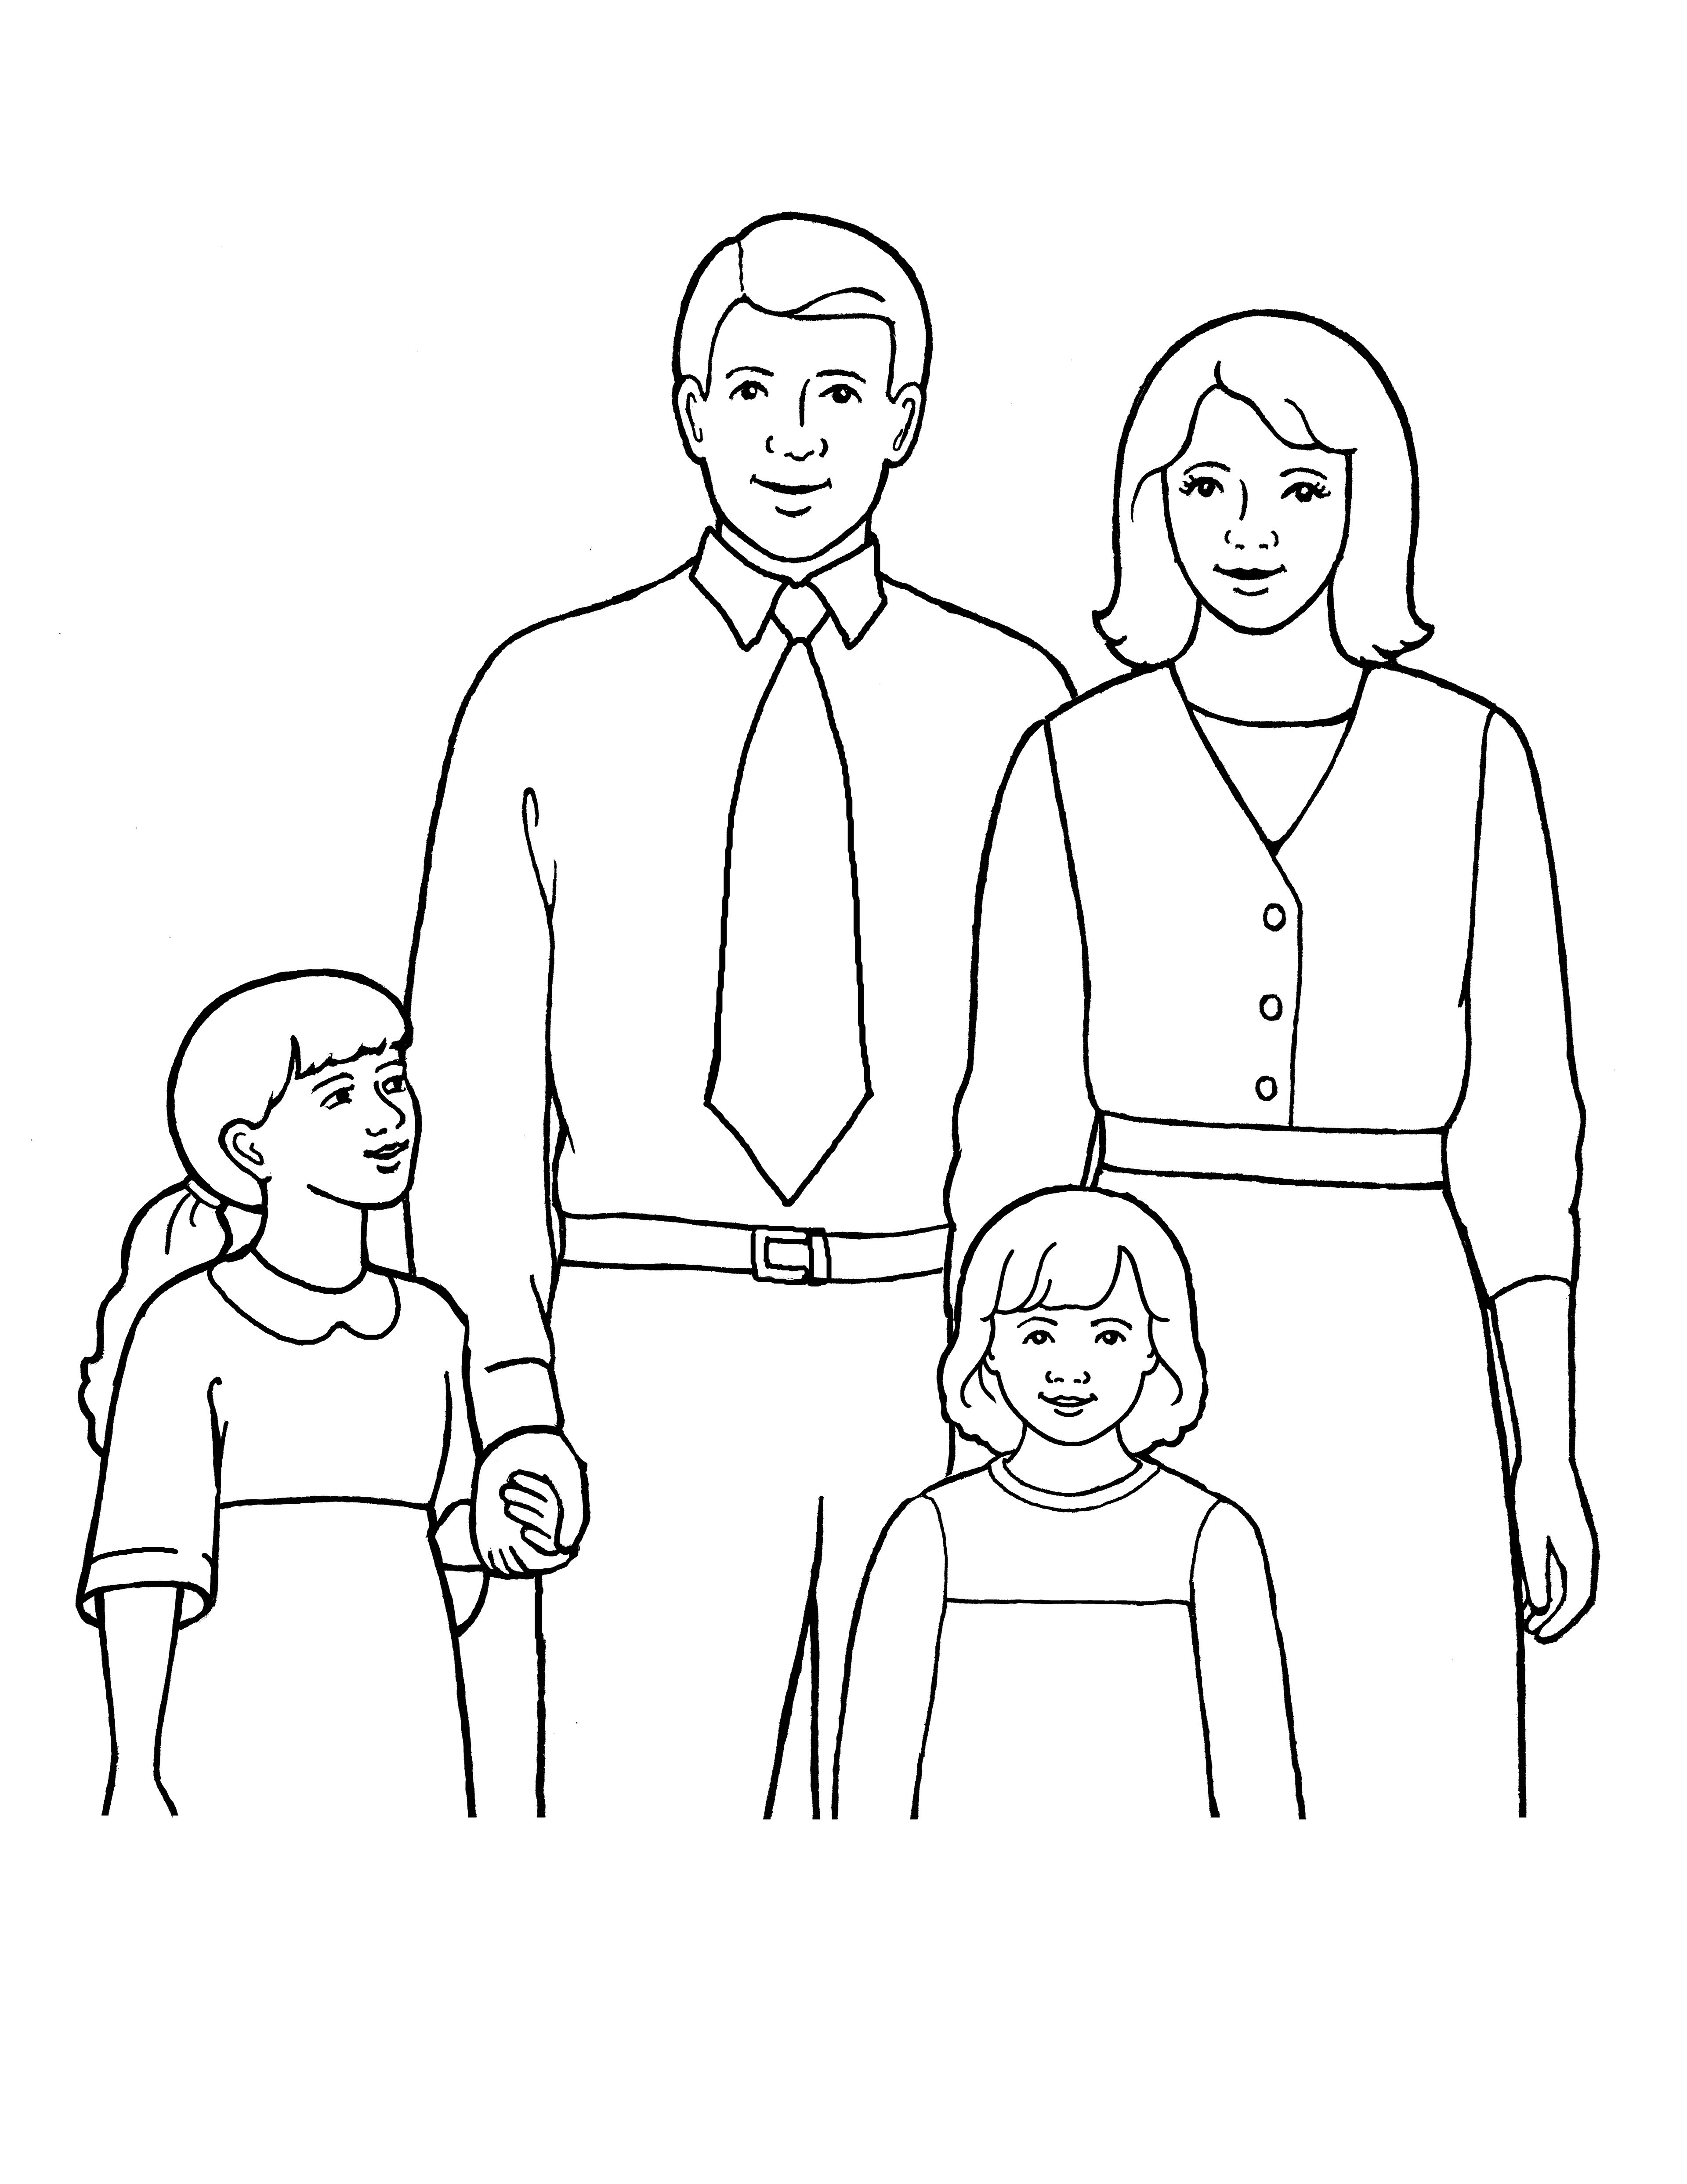 A line drawing of a family of four, from the nursery manual Behold Your Little Ones (2008), page 39.